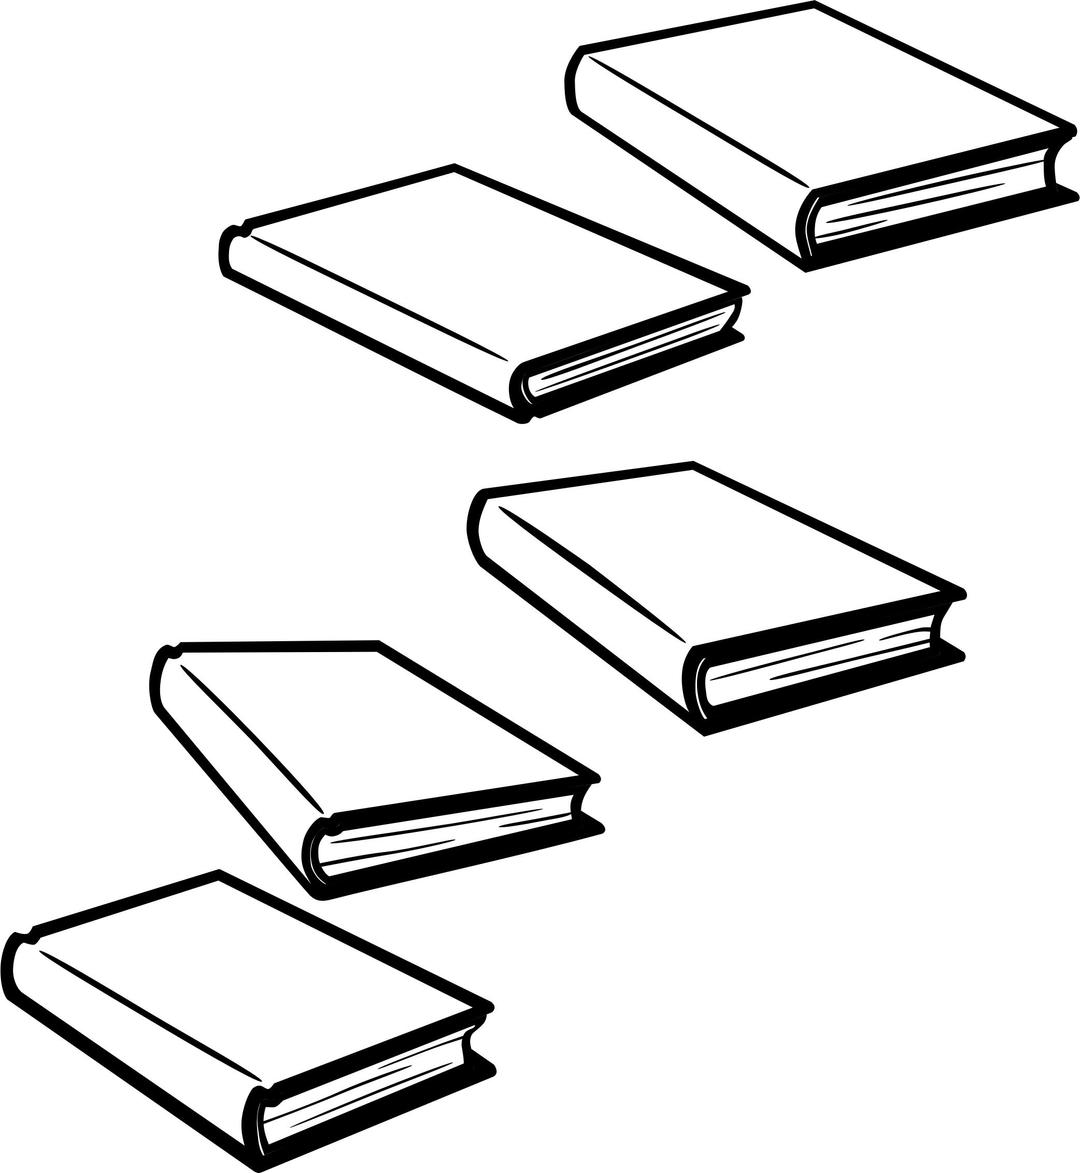 Books - Lineart - Separated png transparent